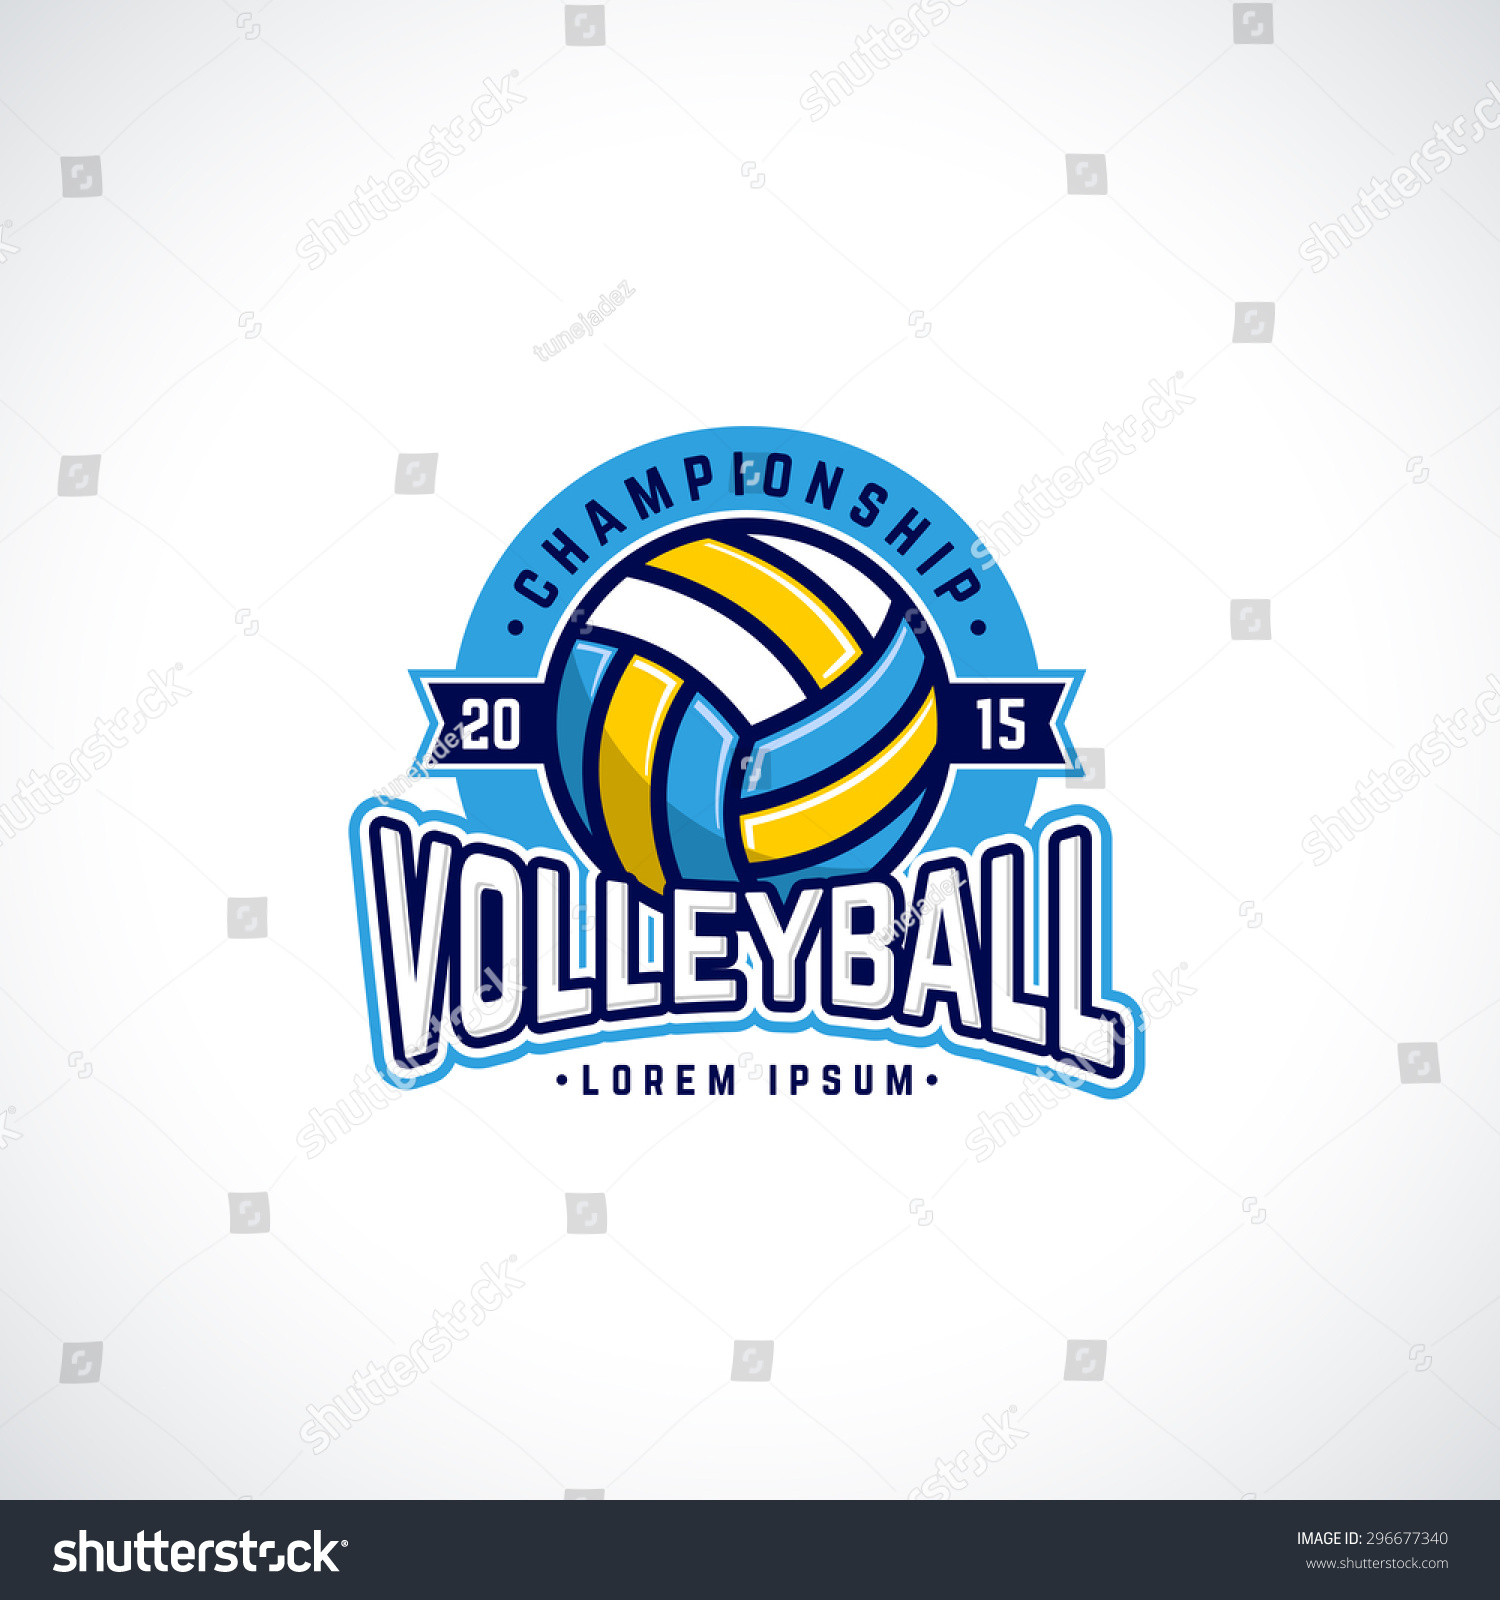 Vector Volleyball Championship Logo With Ball. Sport Badge For ...